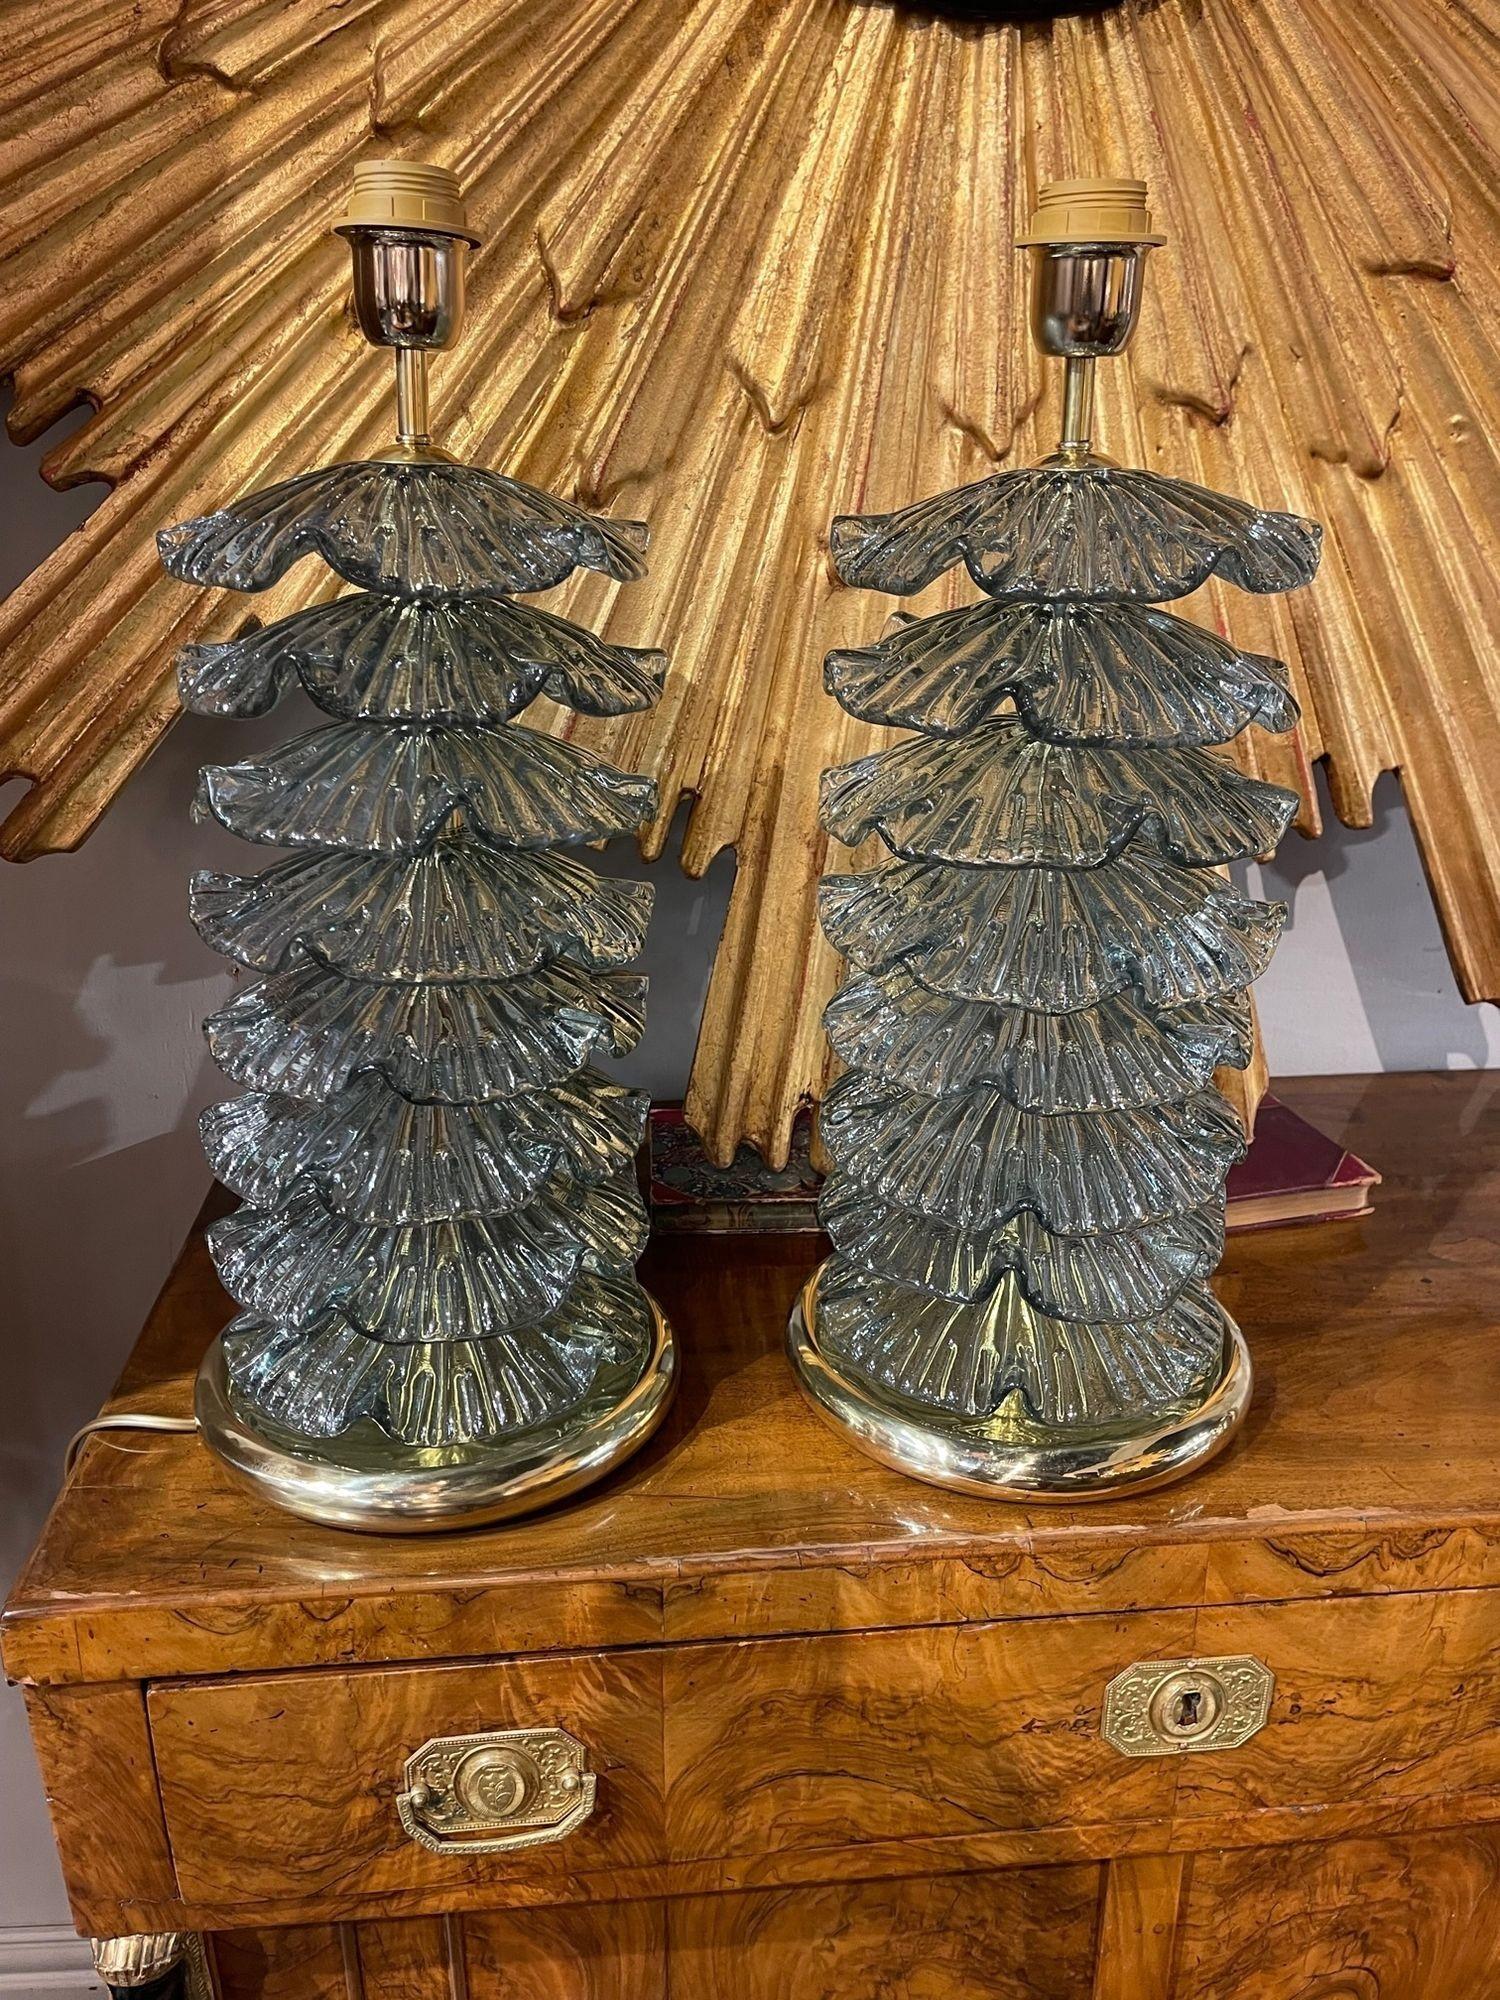 Exquisite pair of modern Murano glass lamps in a gorgeous shade of Fontina green. These add a lovely textural look. An absolutely beautiful decorative element!